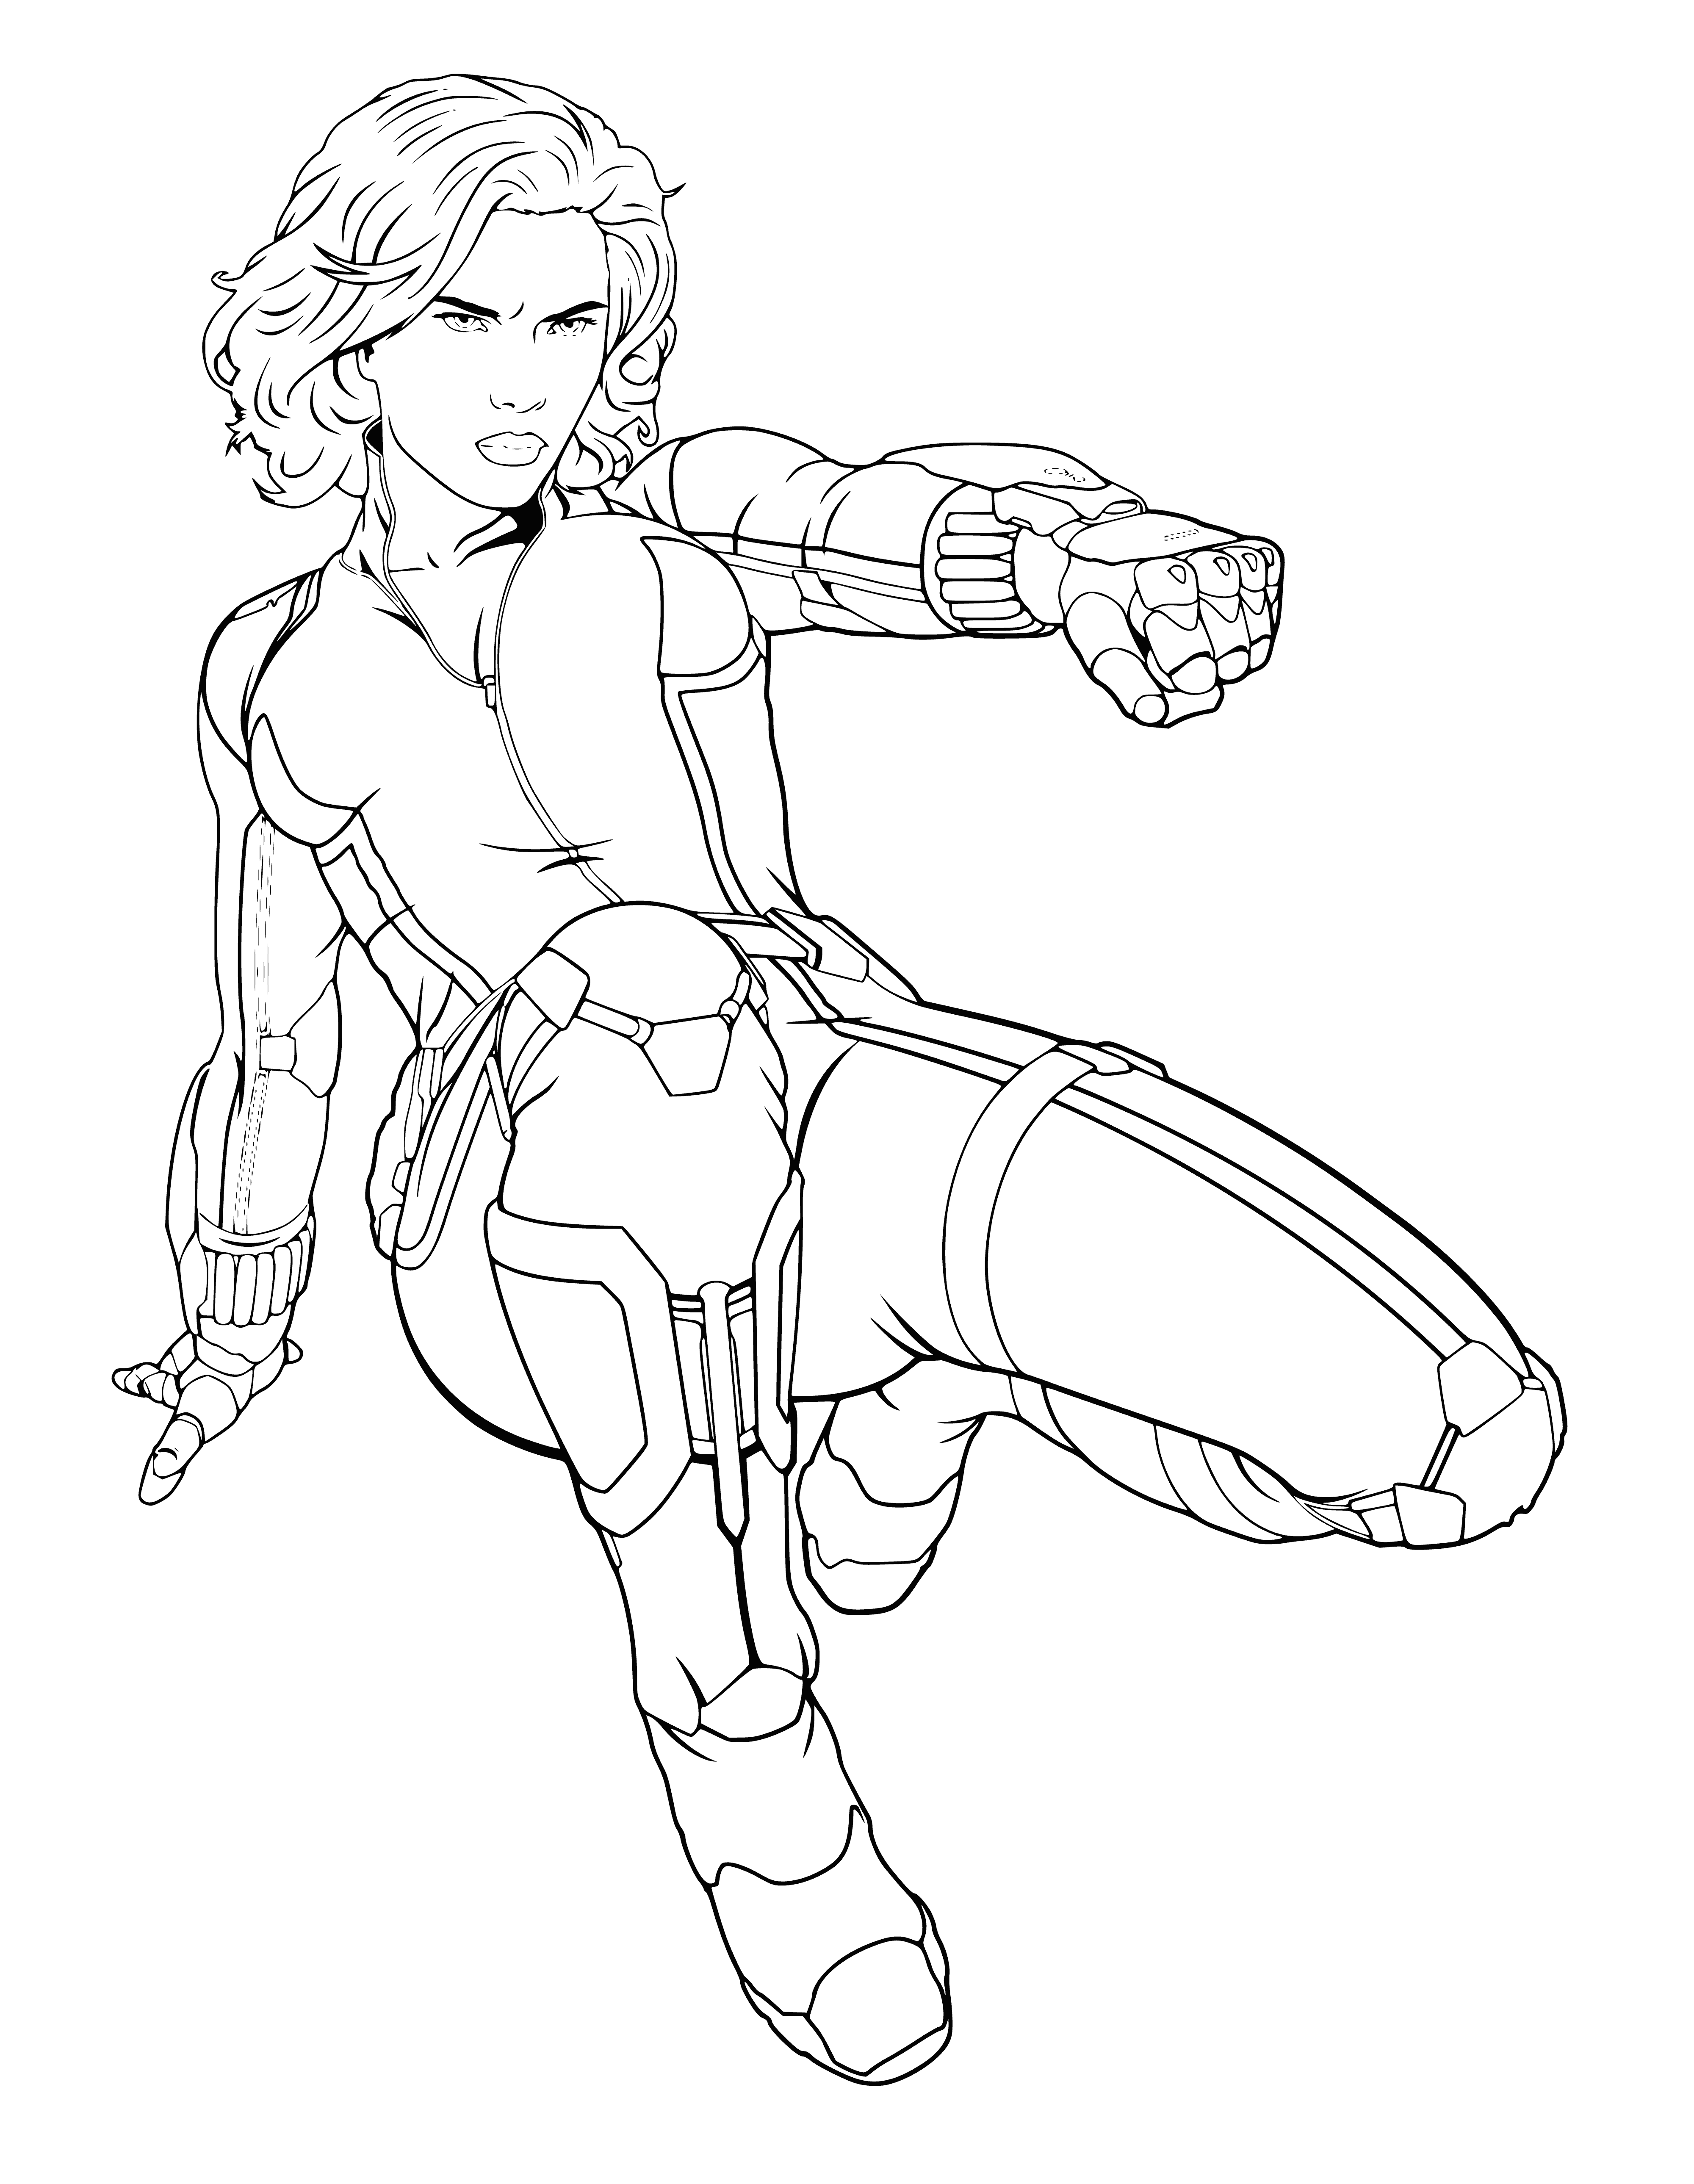 coloring page: The Black Widow stands on a rooftop, dressed in black leather, hourglass on her chest, hair blowing in the wind, tough & ready to fight.